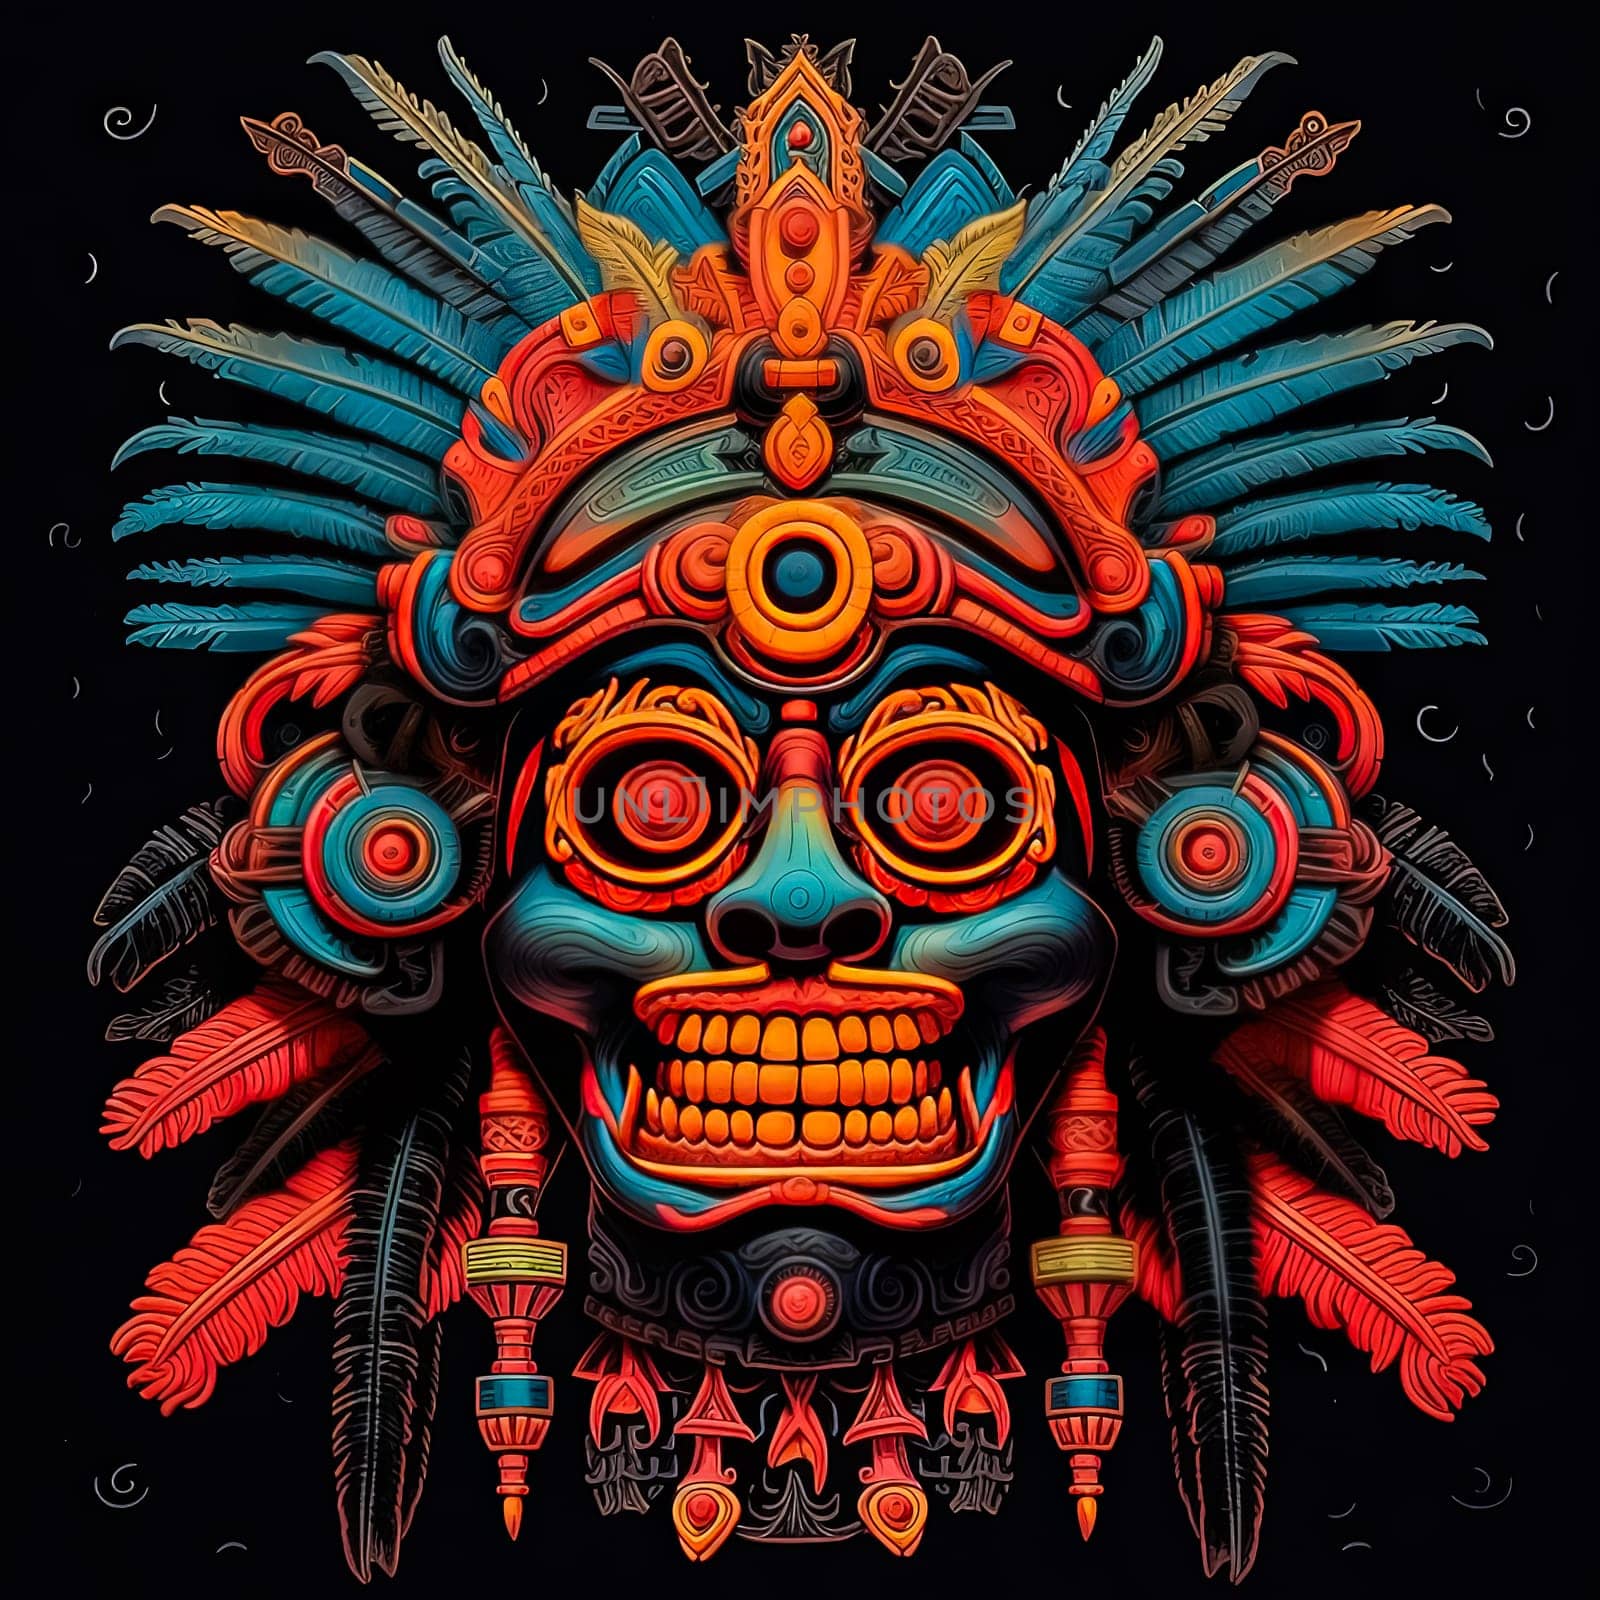 A skull with a feather headdress and a red and blue background. The skull is surrounded by feathers and has a tribal design